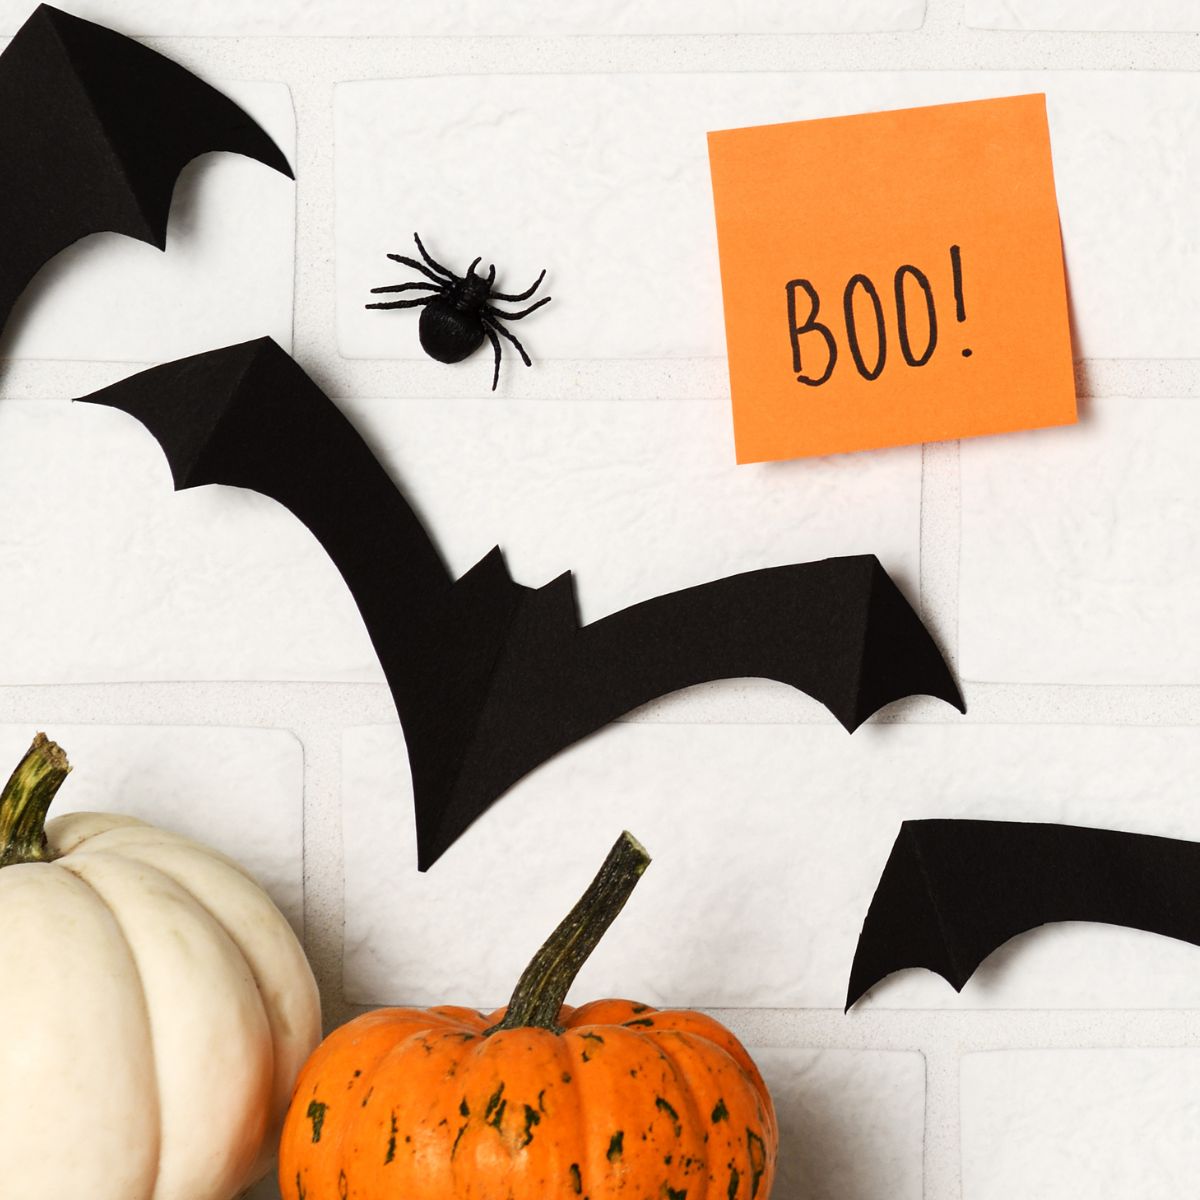 Bats and pumpkins against white backdrop with a post it note that says BOO!